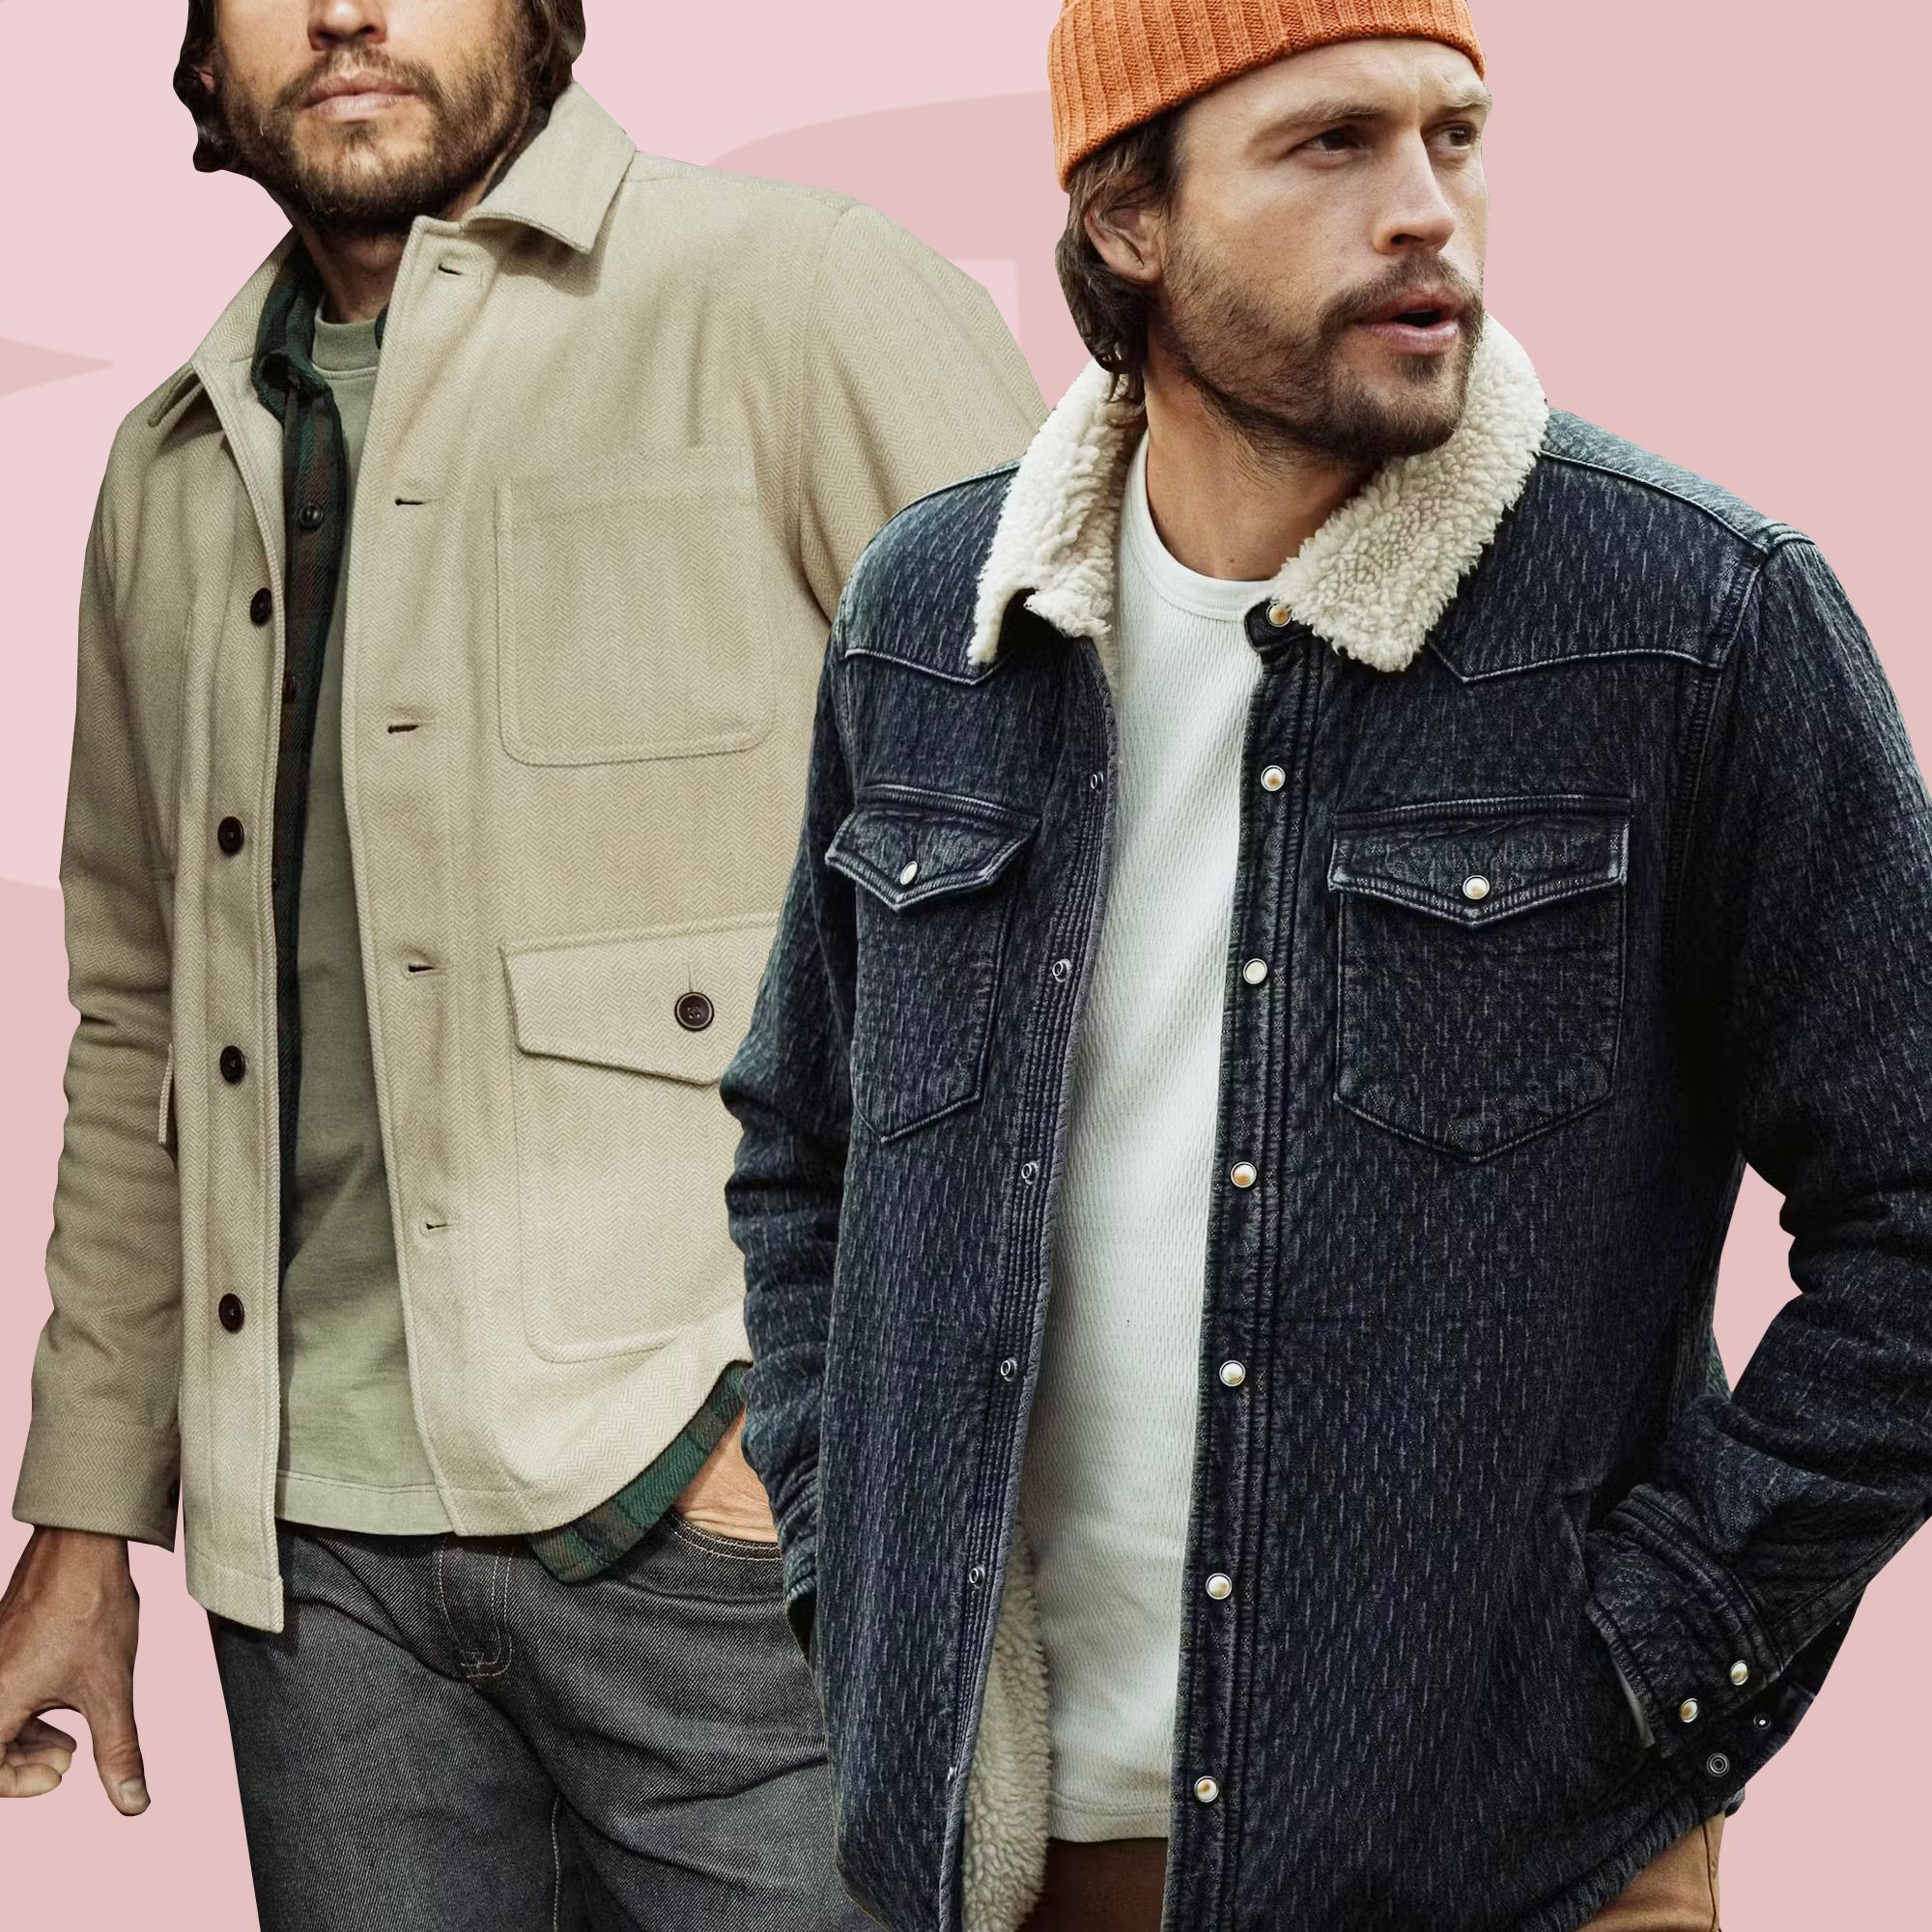 Huckberry's Sale Has Everything You Need Right Now